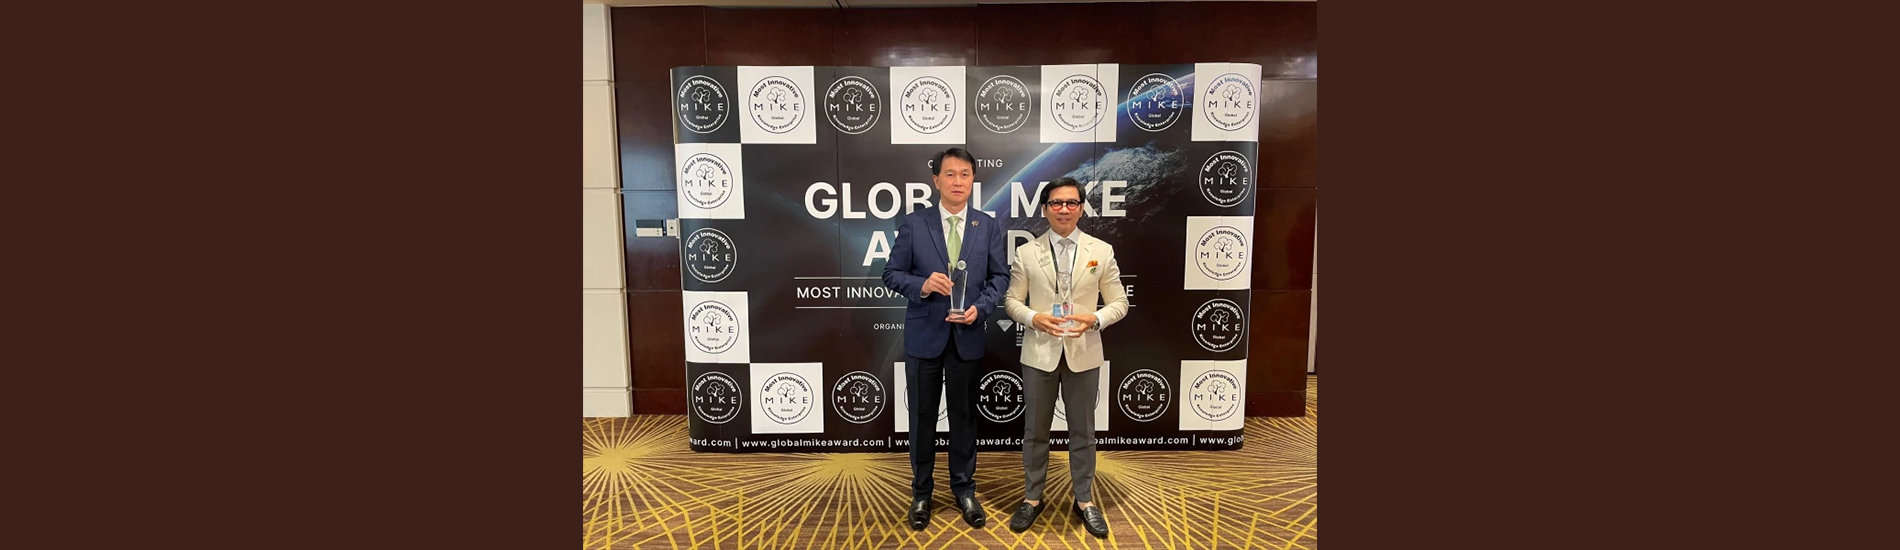 Bangchak wins the Global MIKE Award for knowledge management and innovation for two consecutive years 